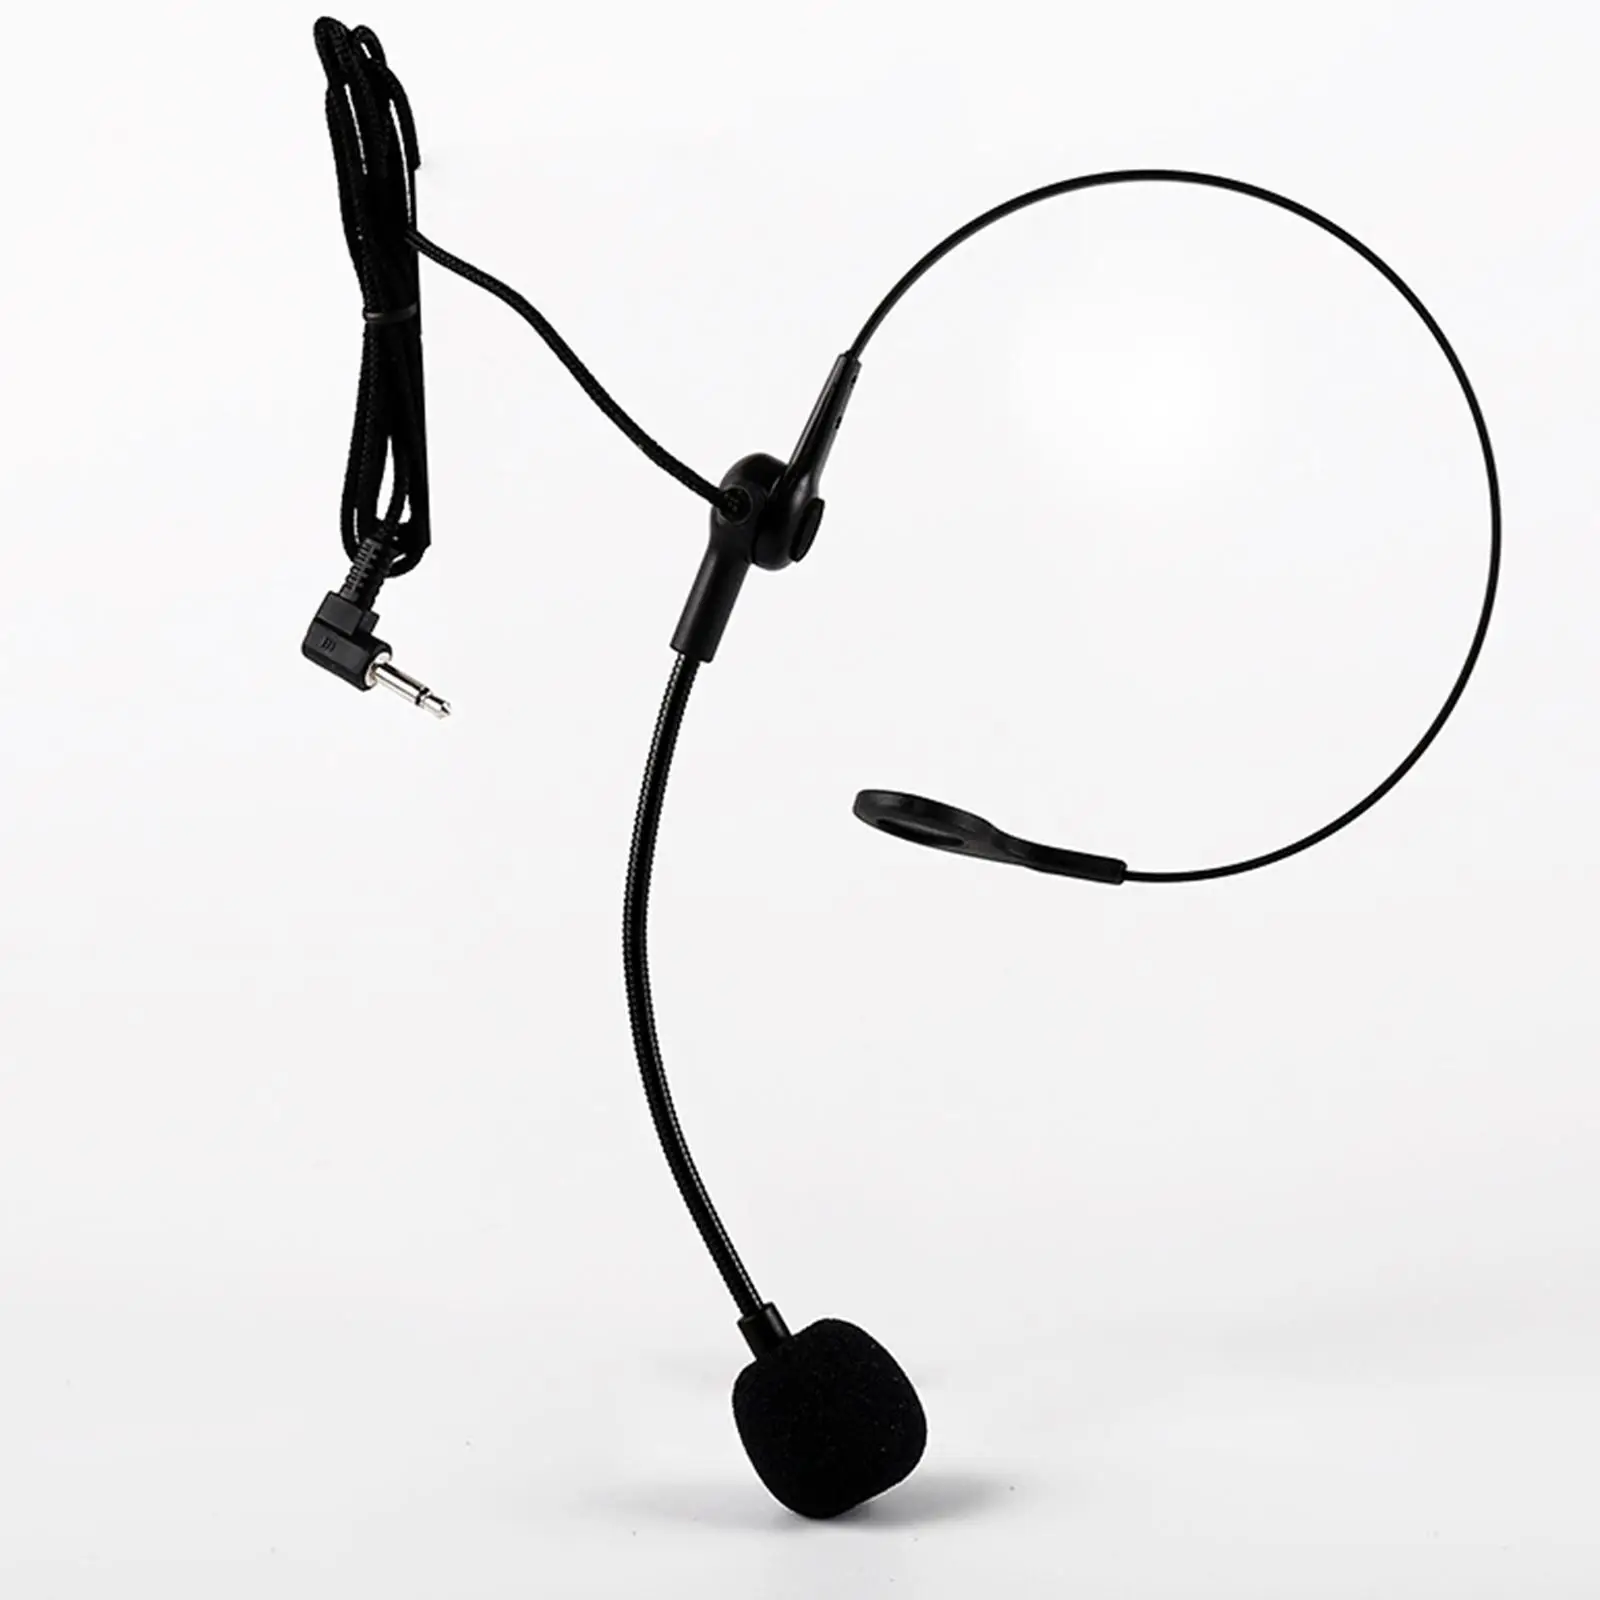 Headset Microphone Hand Free Stereo Headset Adjustable Headphone for Teaching Tour Guide